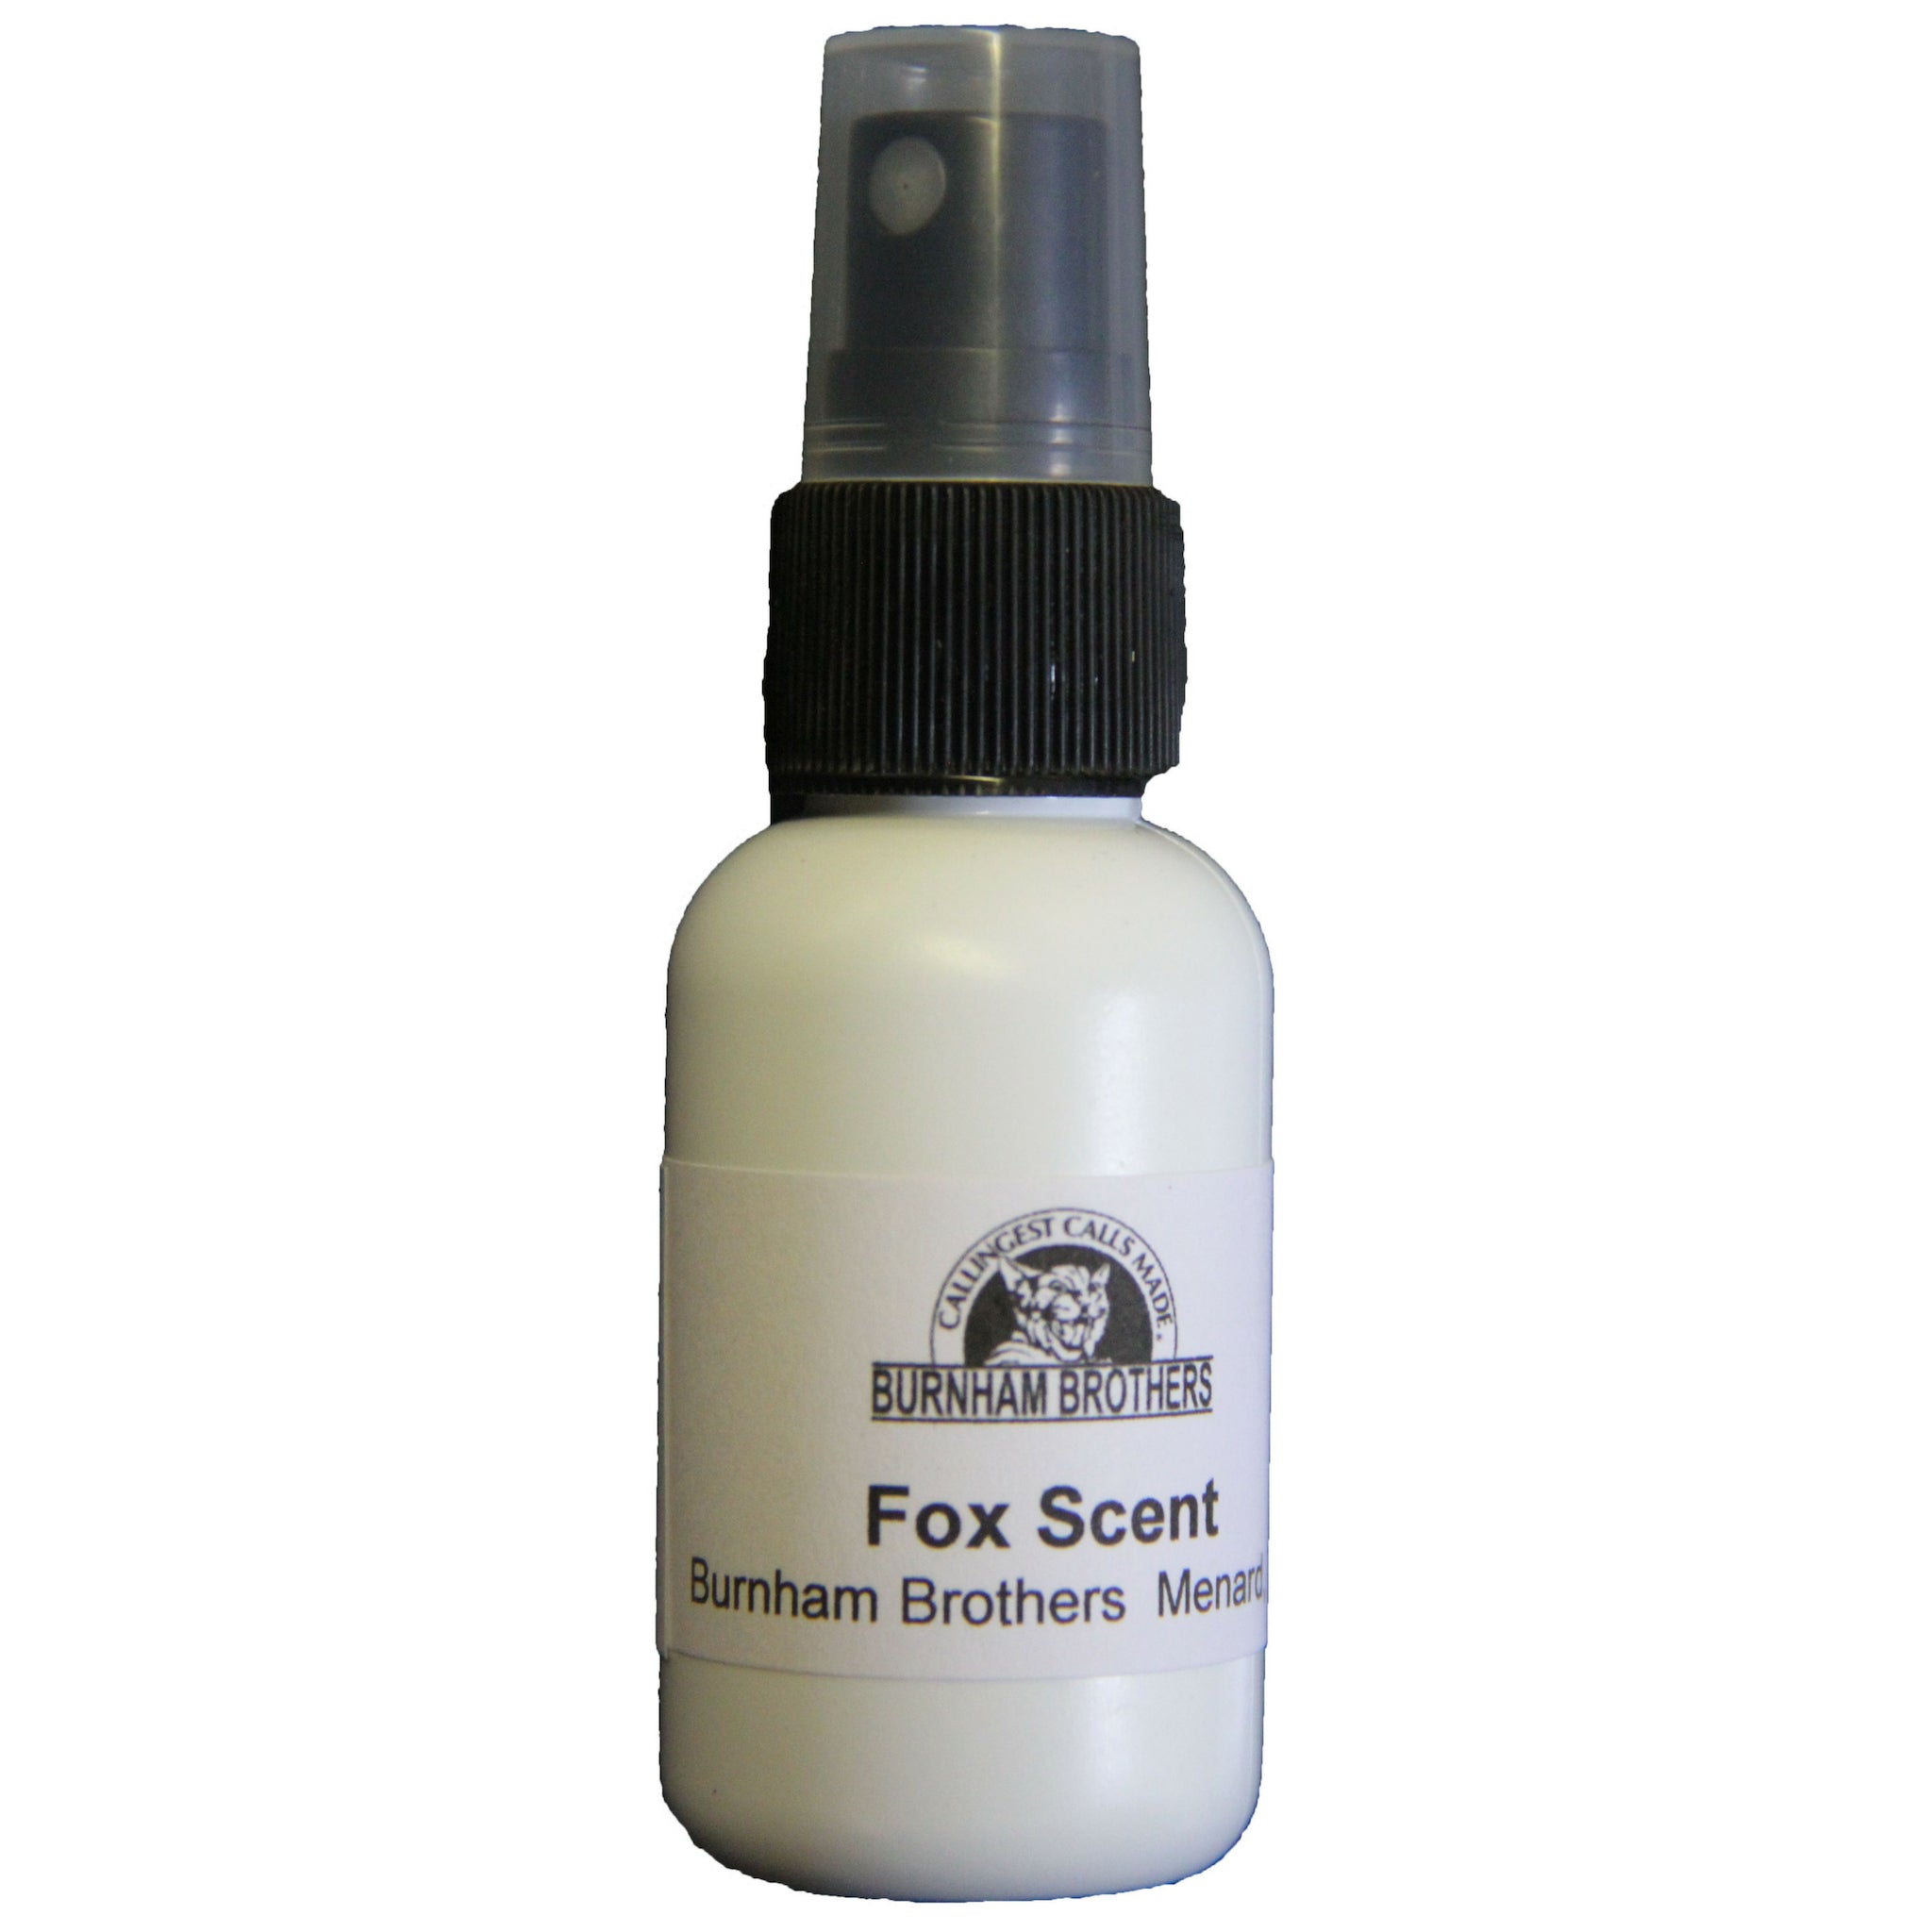 Fox Scent by Burnham Brothers